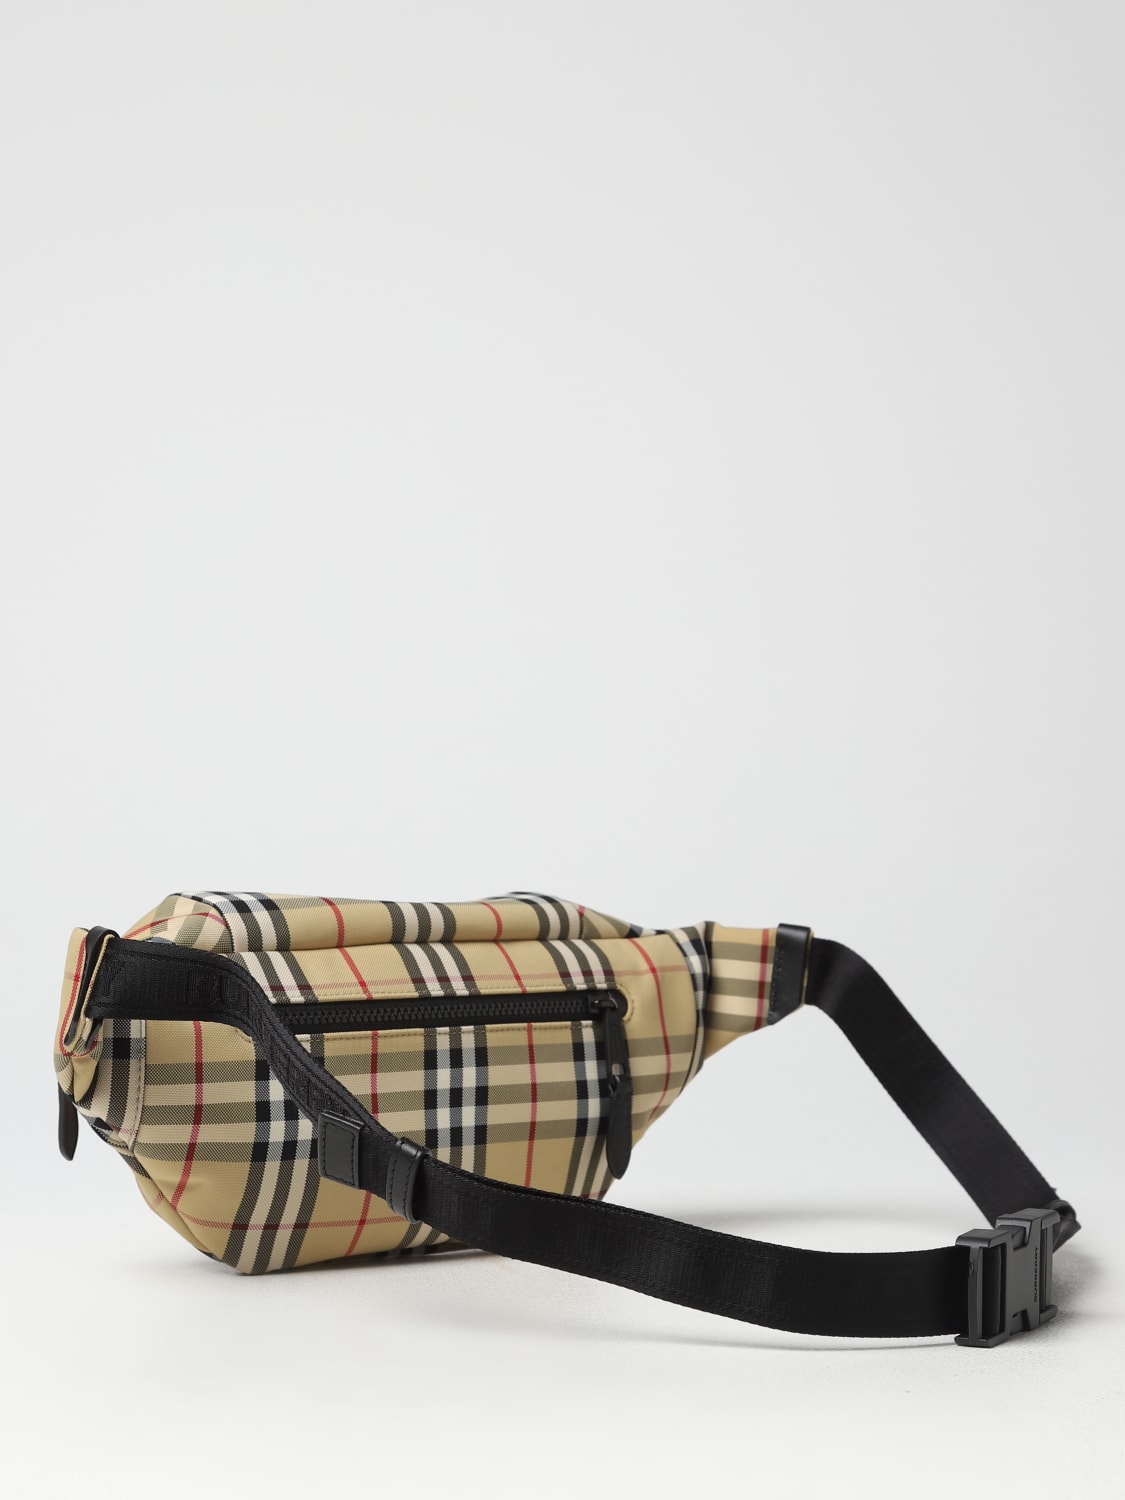 Burberry Vintage Check Pouch In Nylon for Men